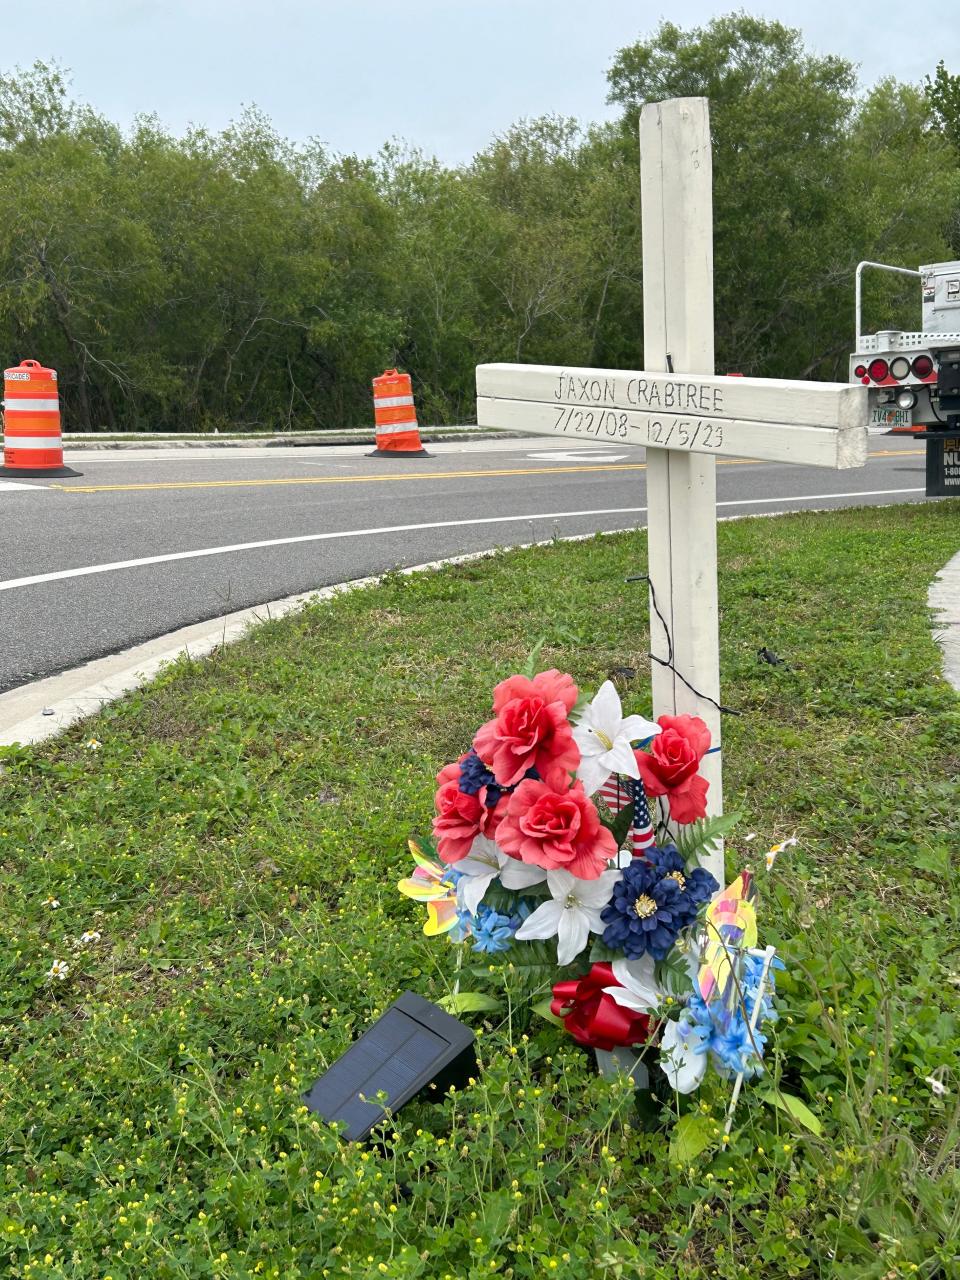 A memorial to Jaxon Crabtree sits at Pipkin and Medulla roads. Jaxon was killed in early December while crossing Pipkin Road en route to school at the Central Florida Aerospace Academy.